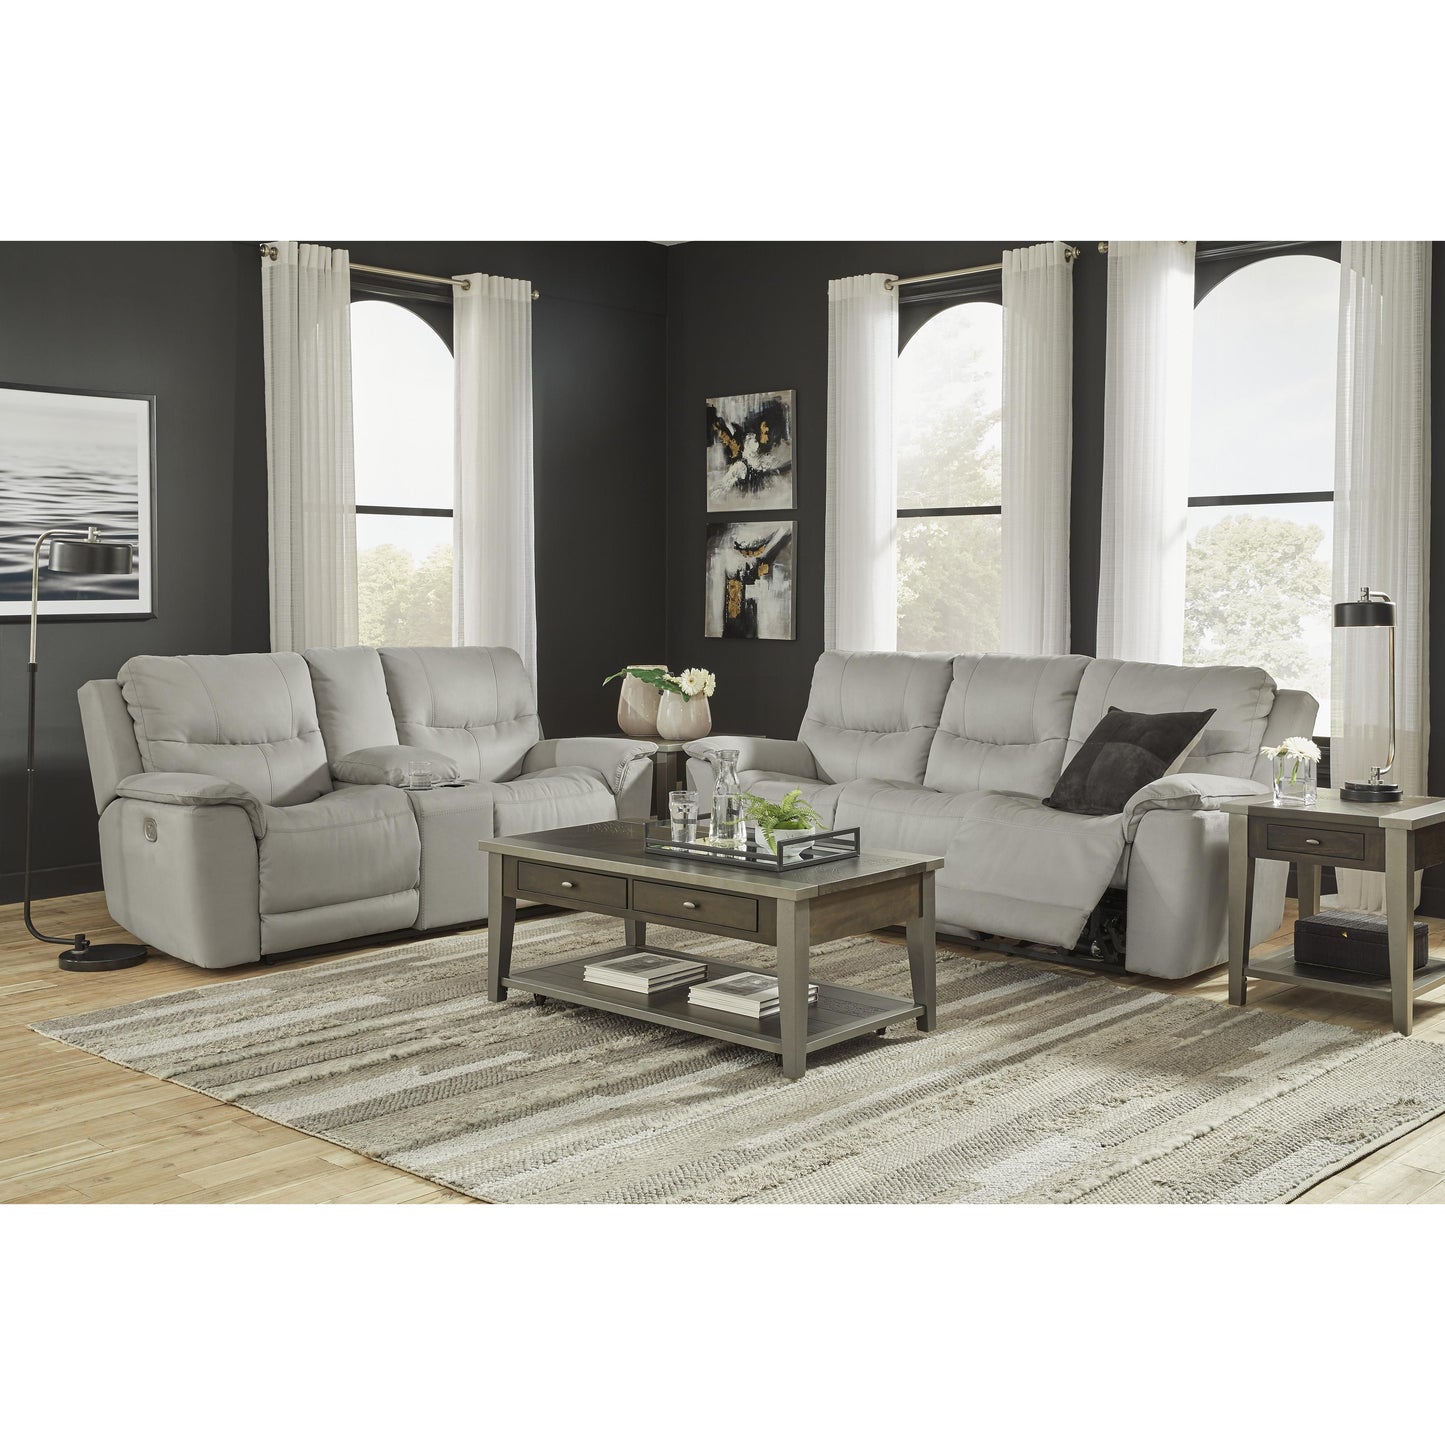 Signature Design by Ashley Next-Gen Gaucho Power Reclining Leather Look Sofa 6080615 IMAGE 12